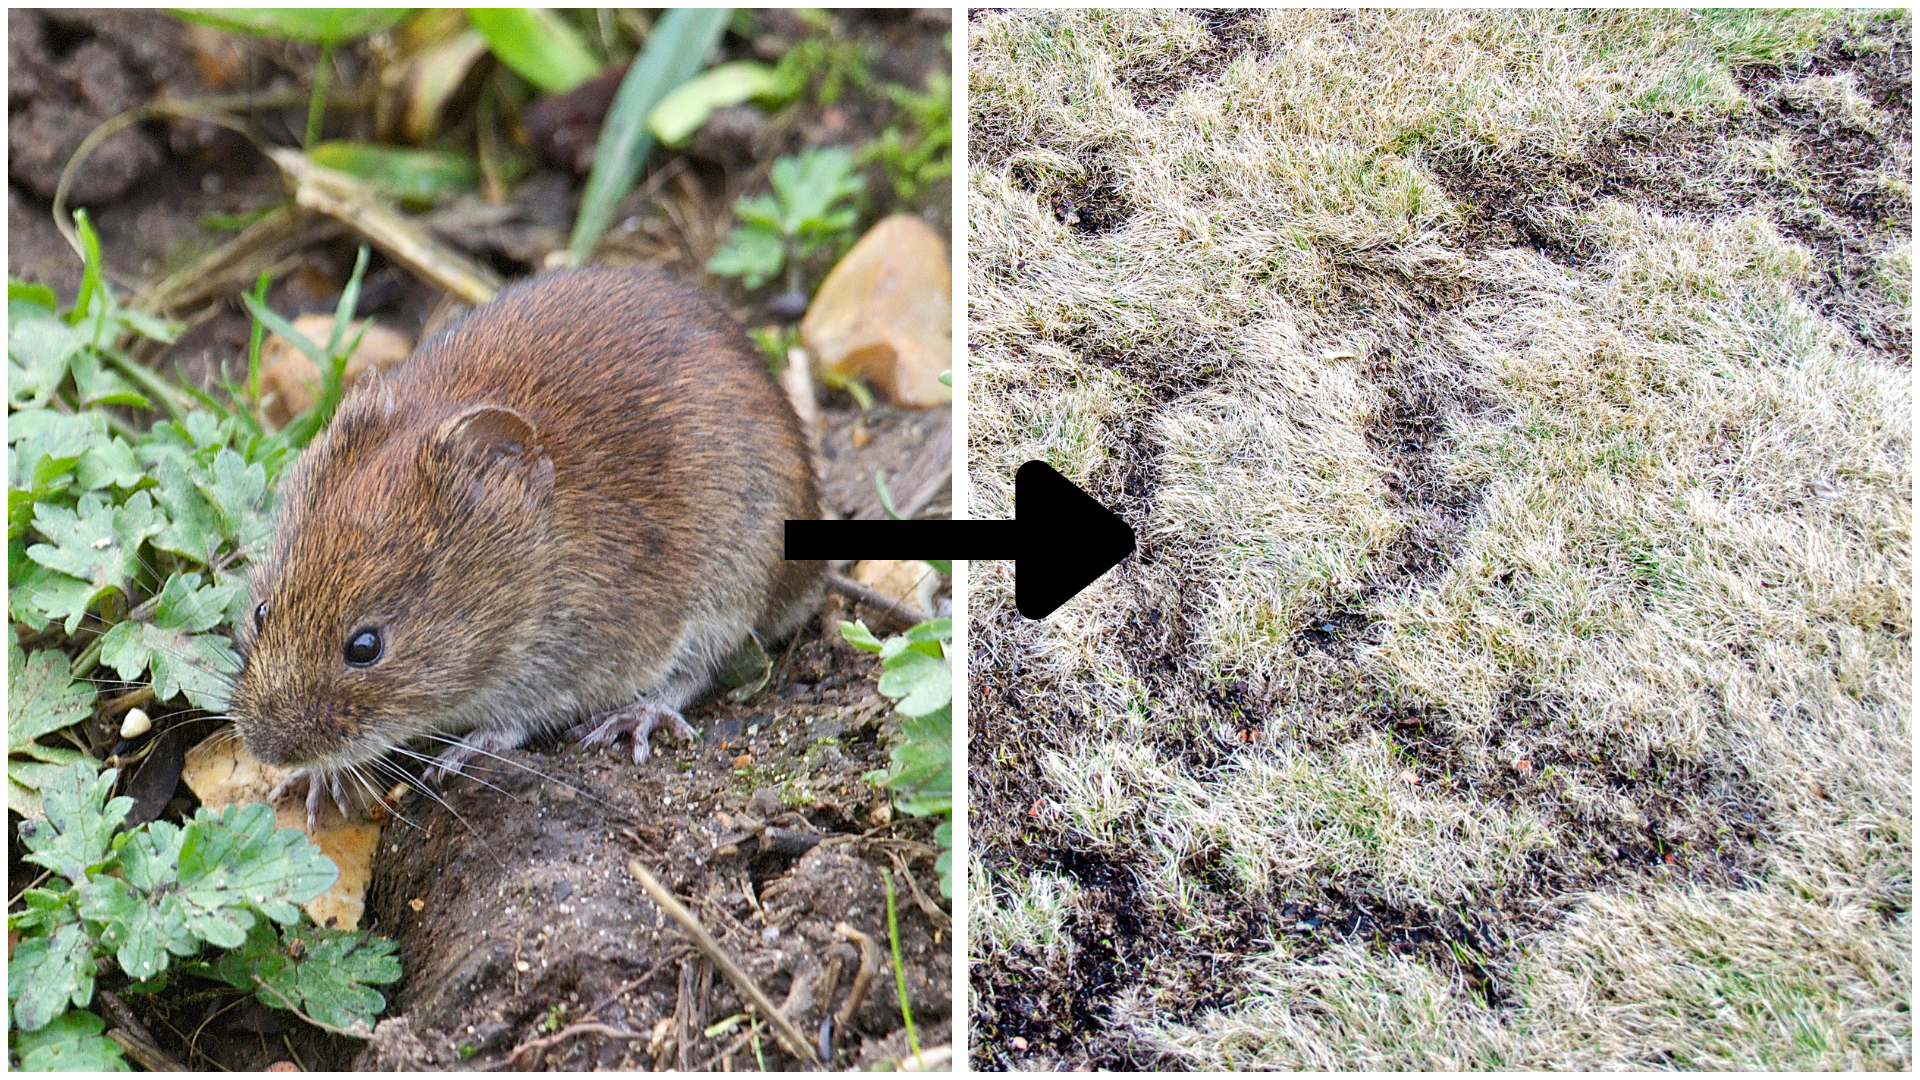 One particular type of vole that tends to cause more damage in the fall and winter is the meadow vo...